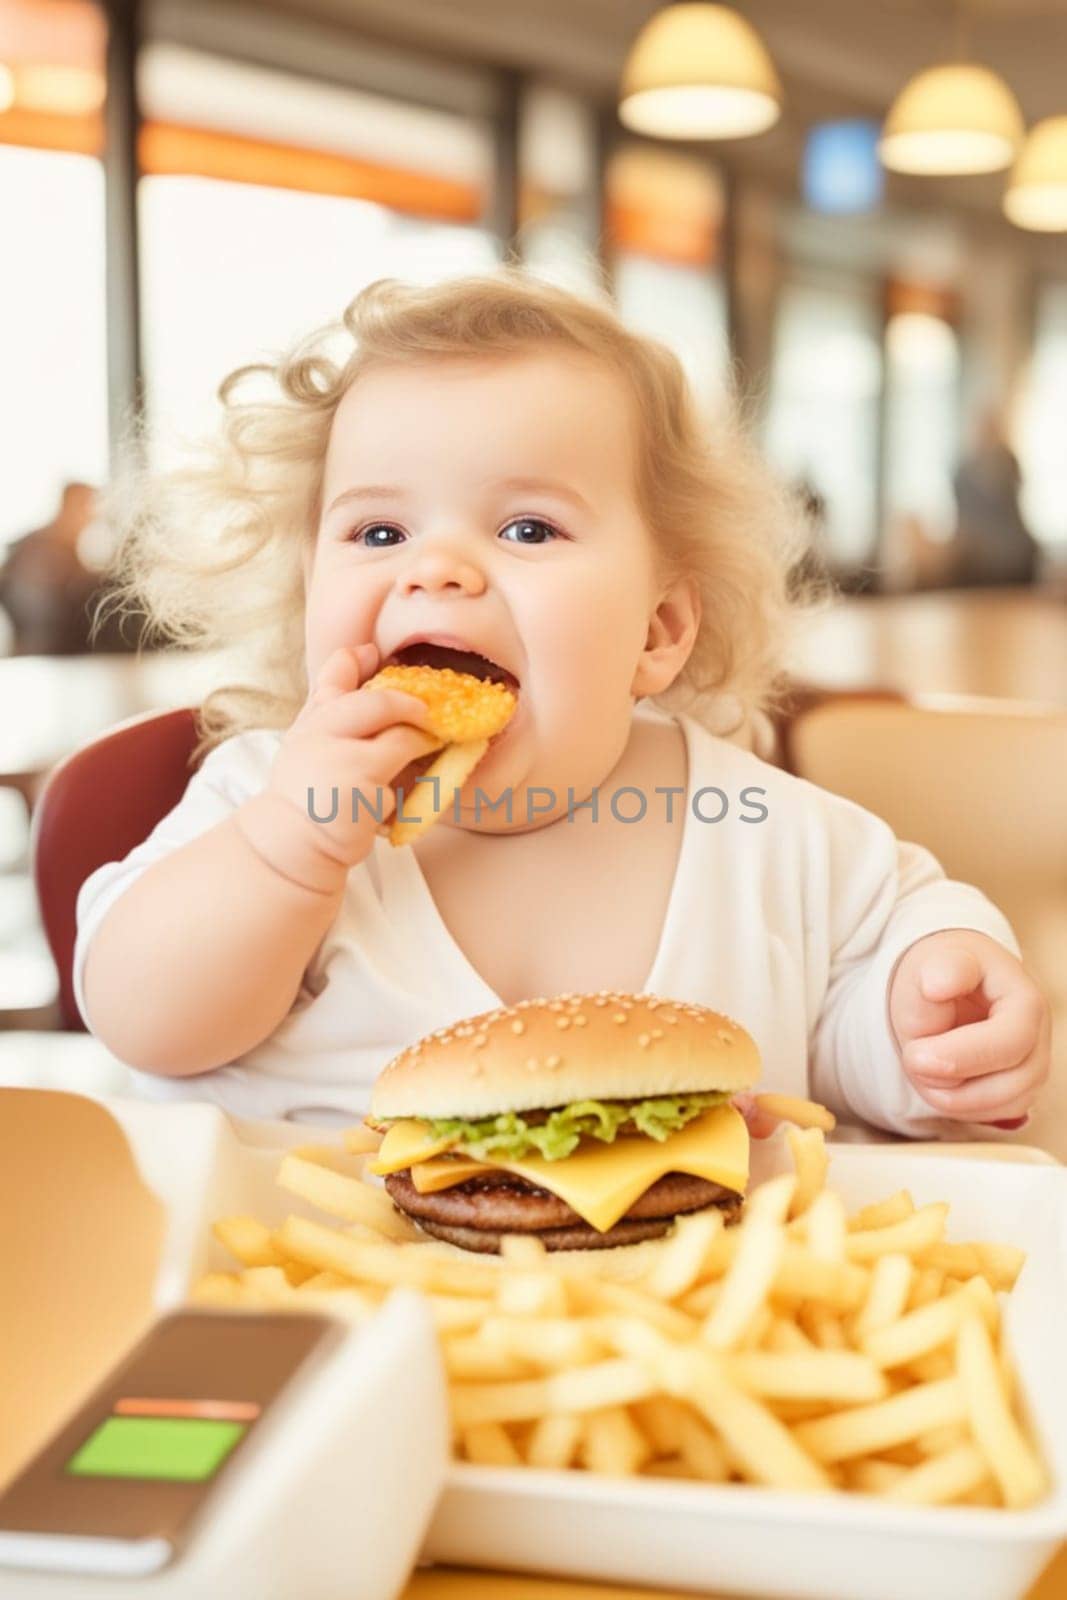 obese boy girl eating fast food , hamburger, french fries - unhealthy eating concept illustration by verbano